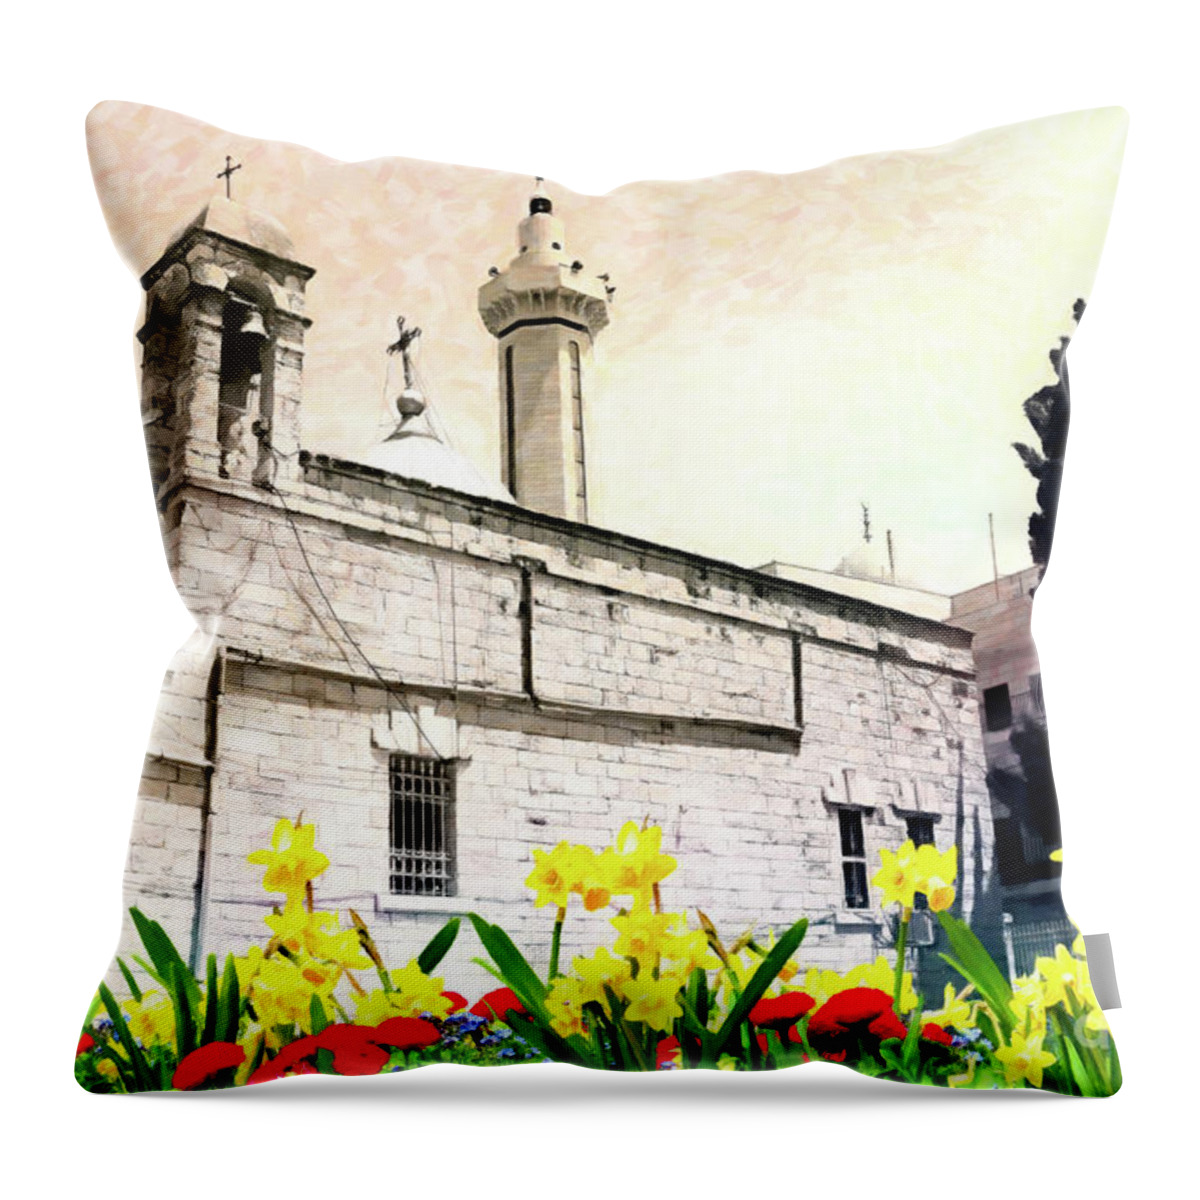 Saint George Throw Pillow featuring the photograph Saint George Flowers by Munir Alawi